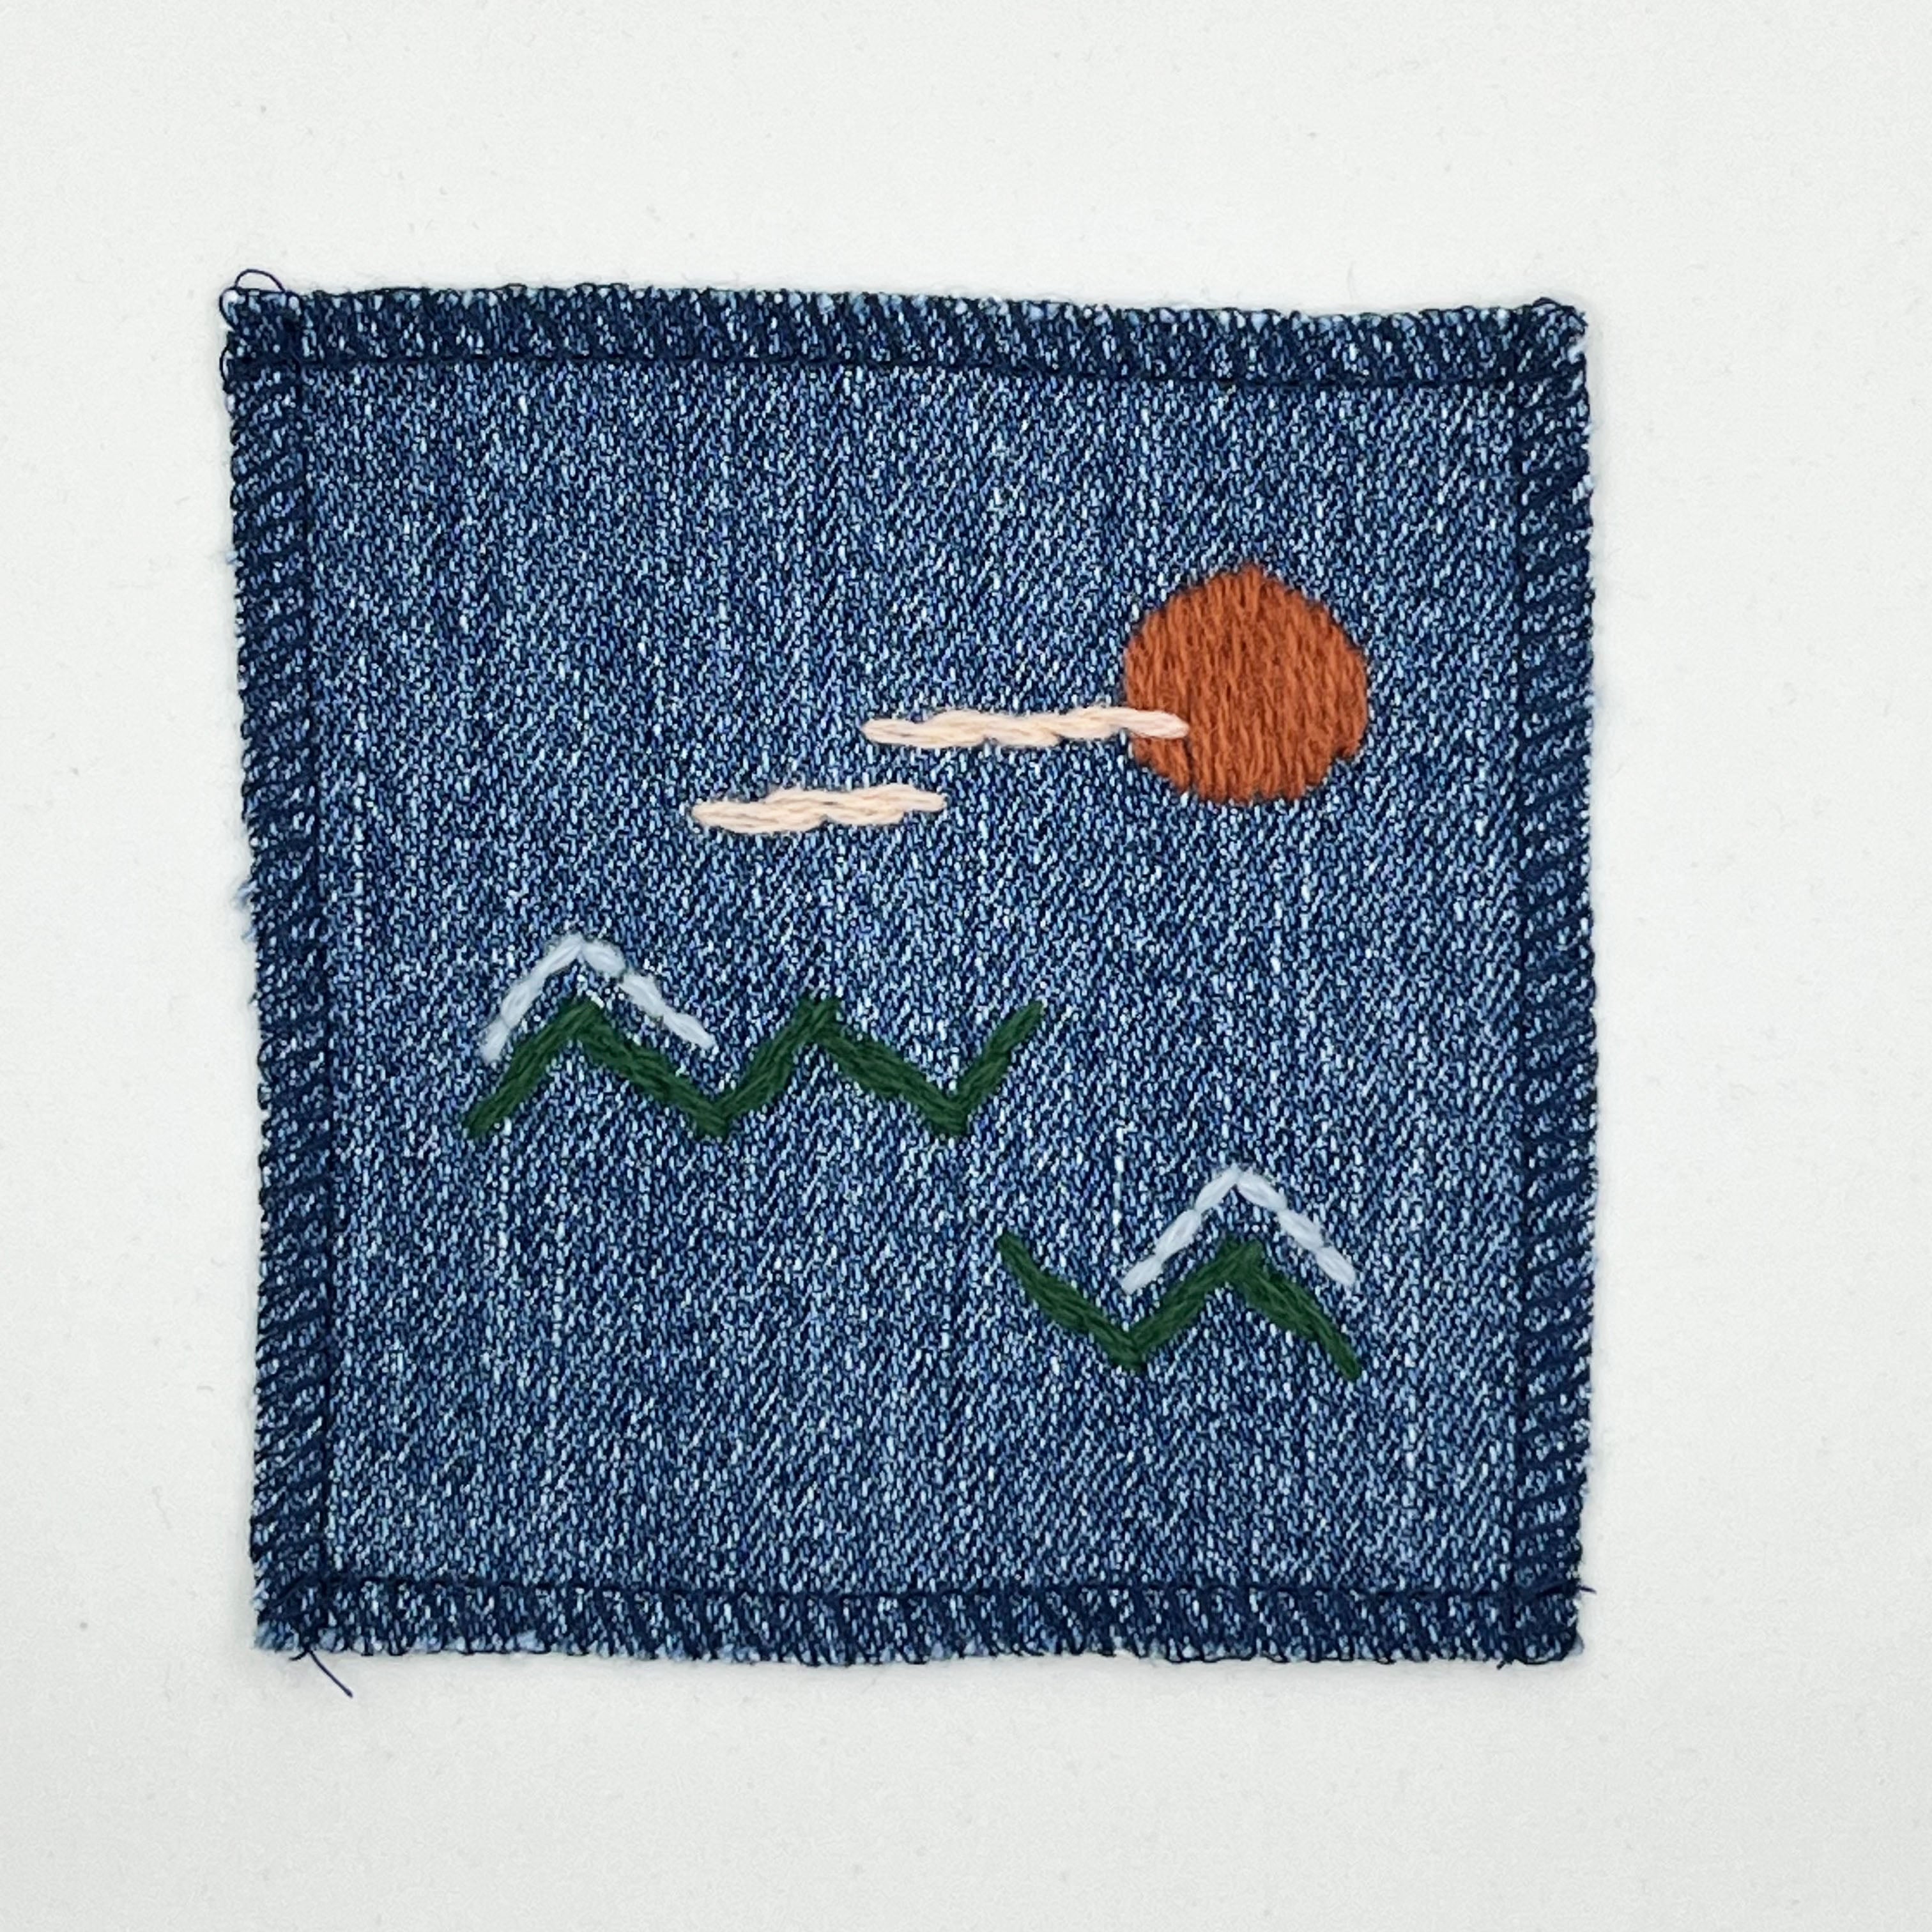 Hand Embroidered Abstract Landscape Patch